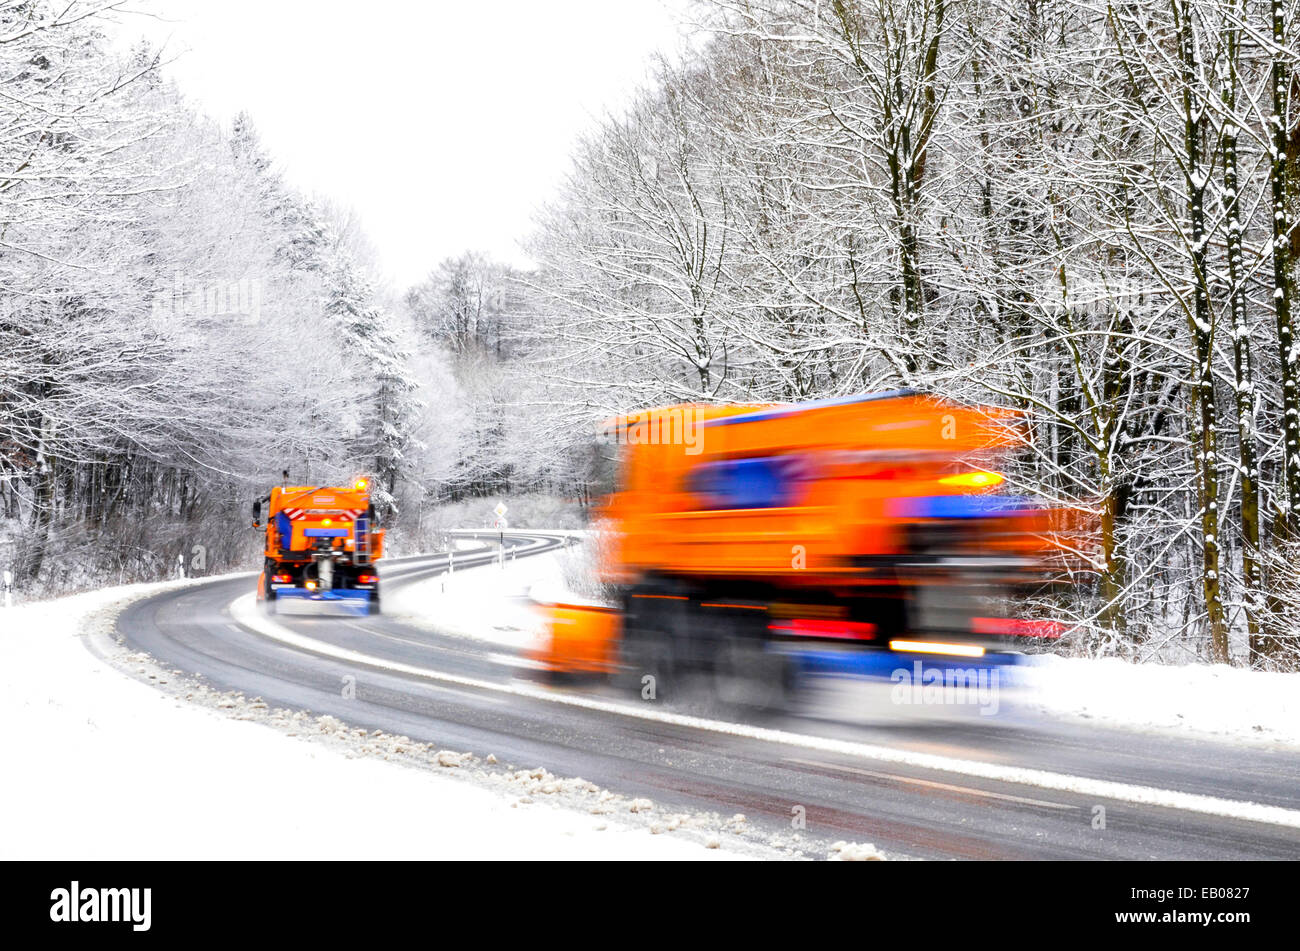 Two working snowplows on winter road, vehicles blurred Stock Photo